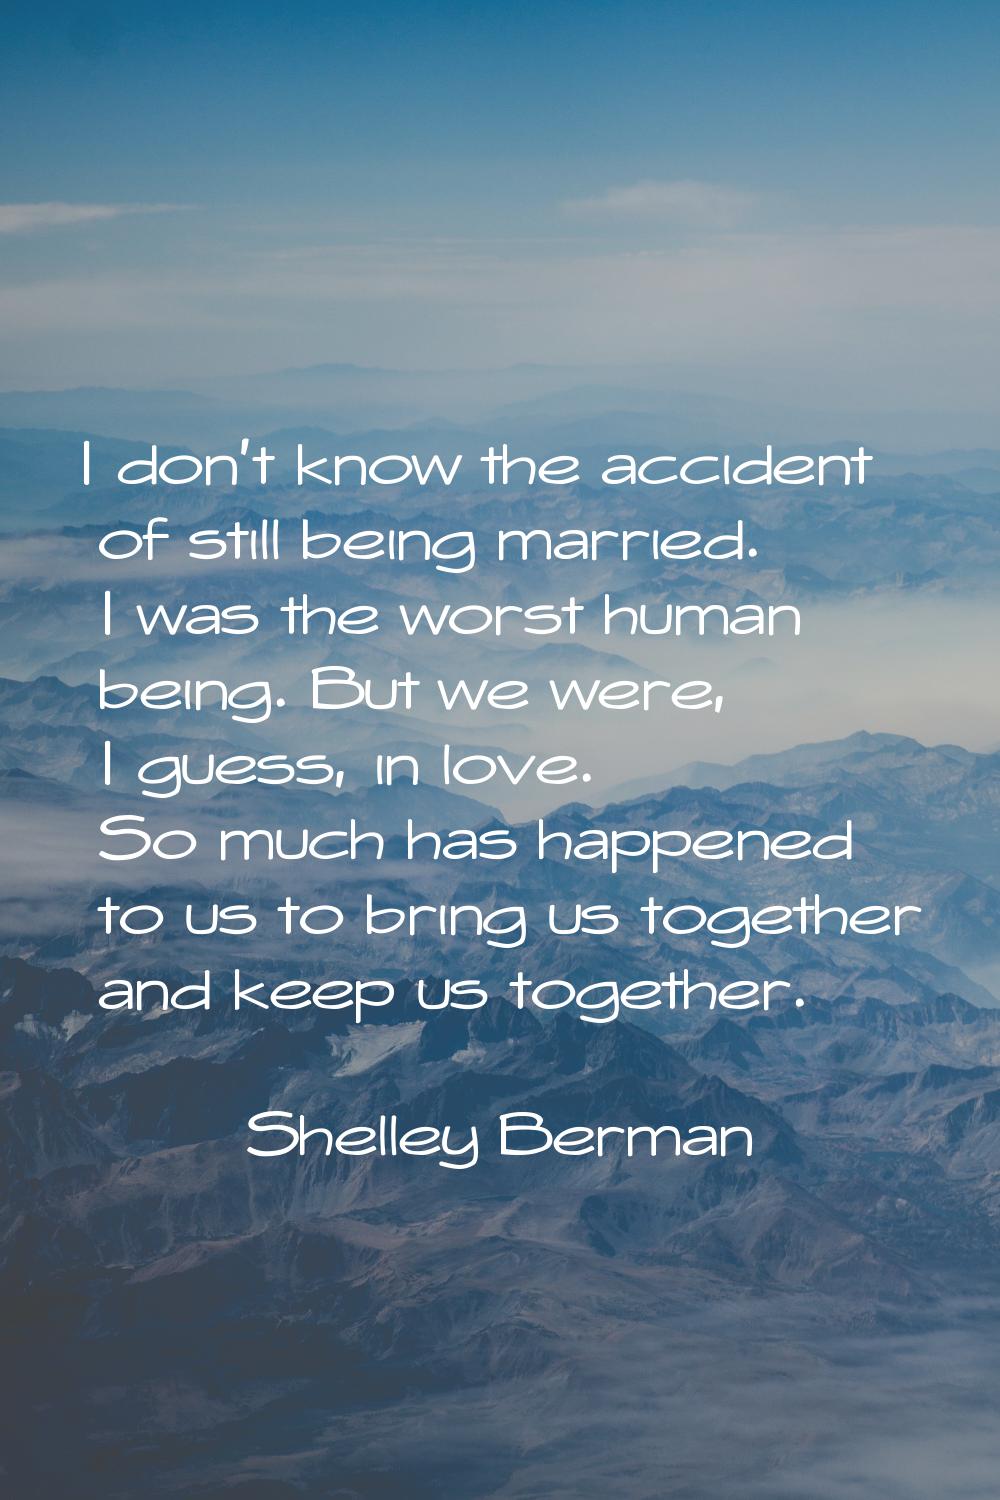 I don't know the accident of still being married. I was the worst human being. But we were, I guess